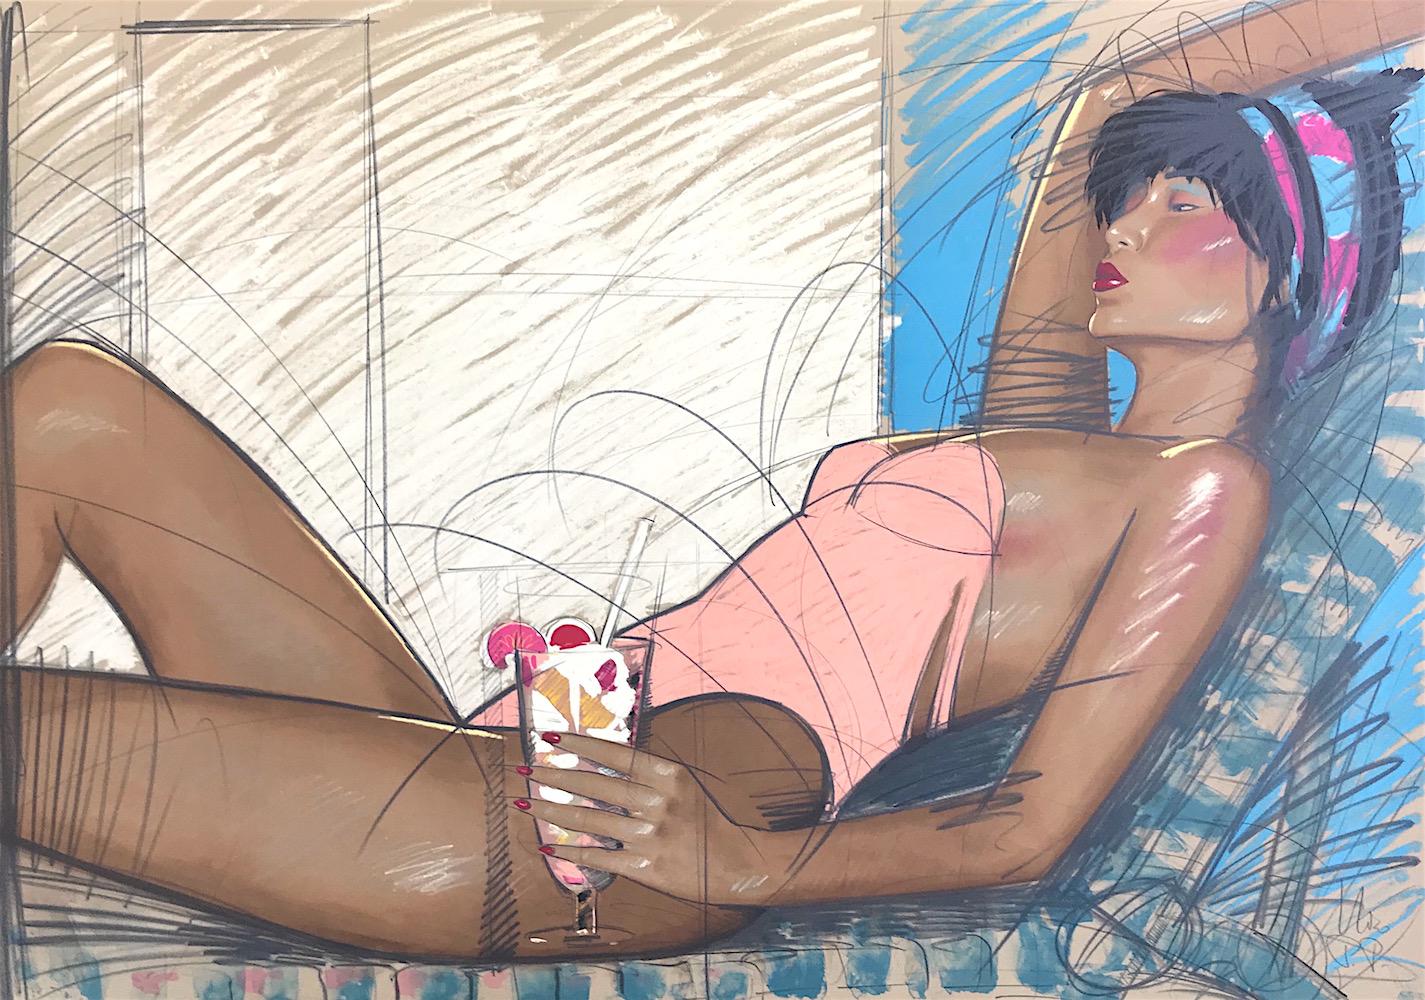 Nico Vrielink Figurative Print - SUNBATHER Signed Lithograph, Sunbather Peach Swimsuit, Lounge Chair, Tall Drink 